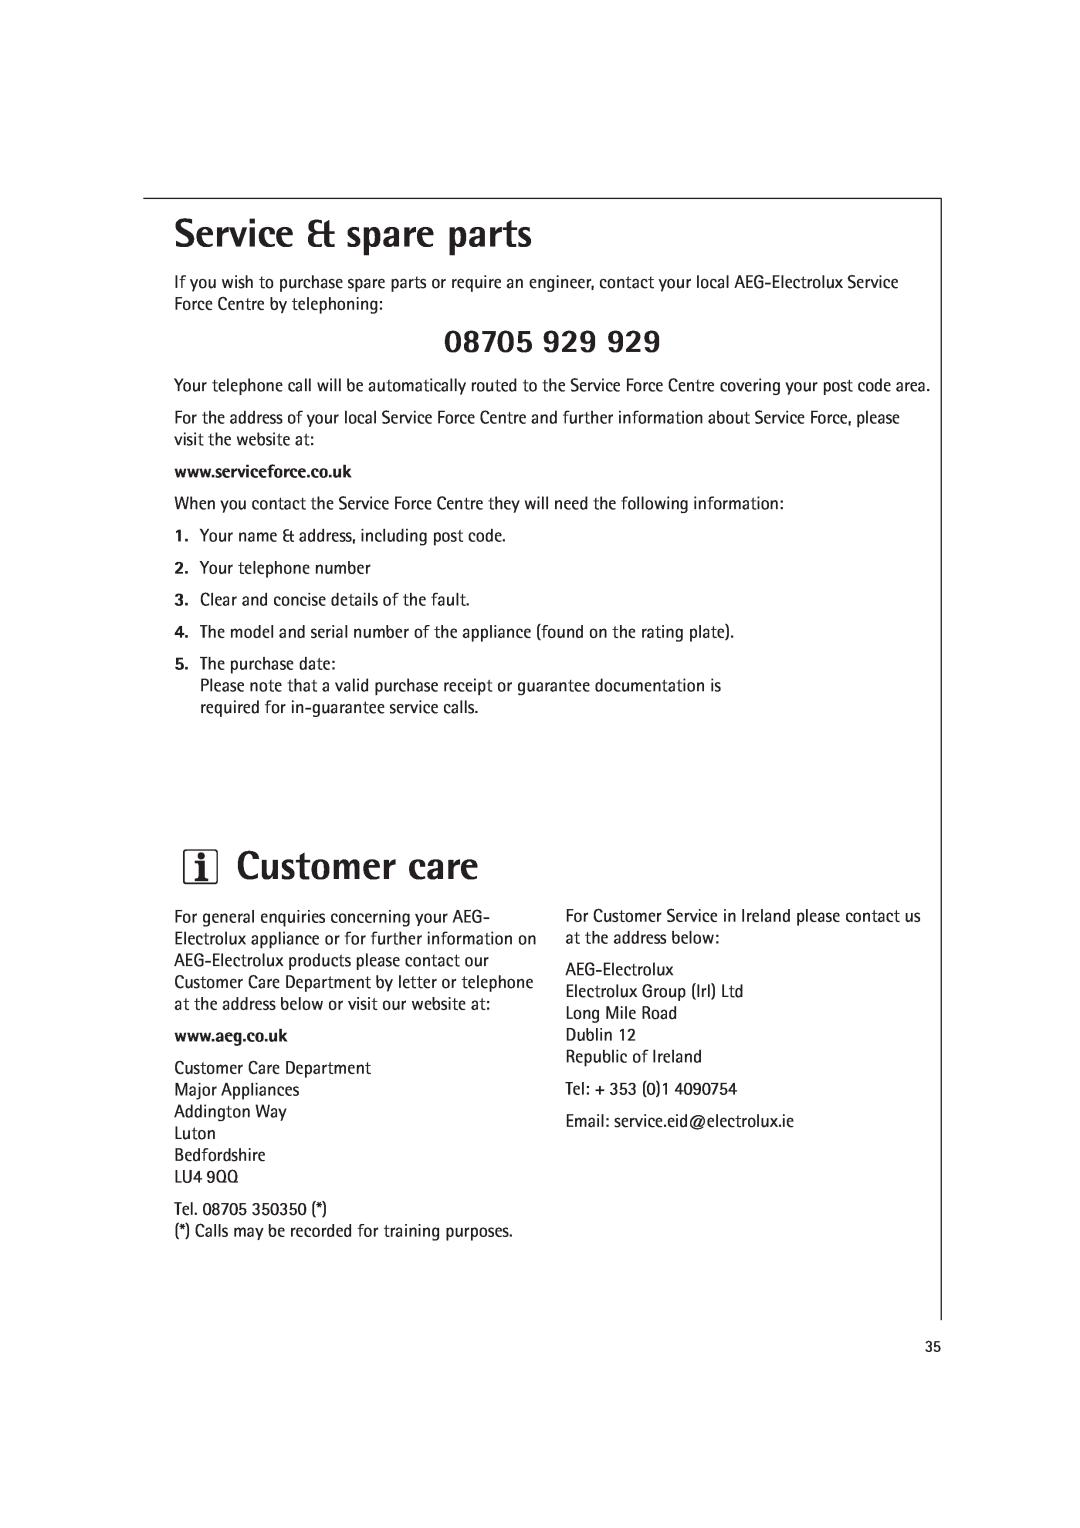 Electrolux MCC4060E operating instructions Service & spare parts, Customer care, 08705 929 